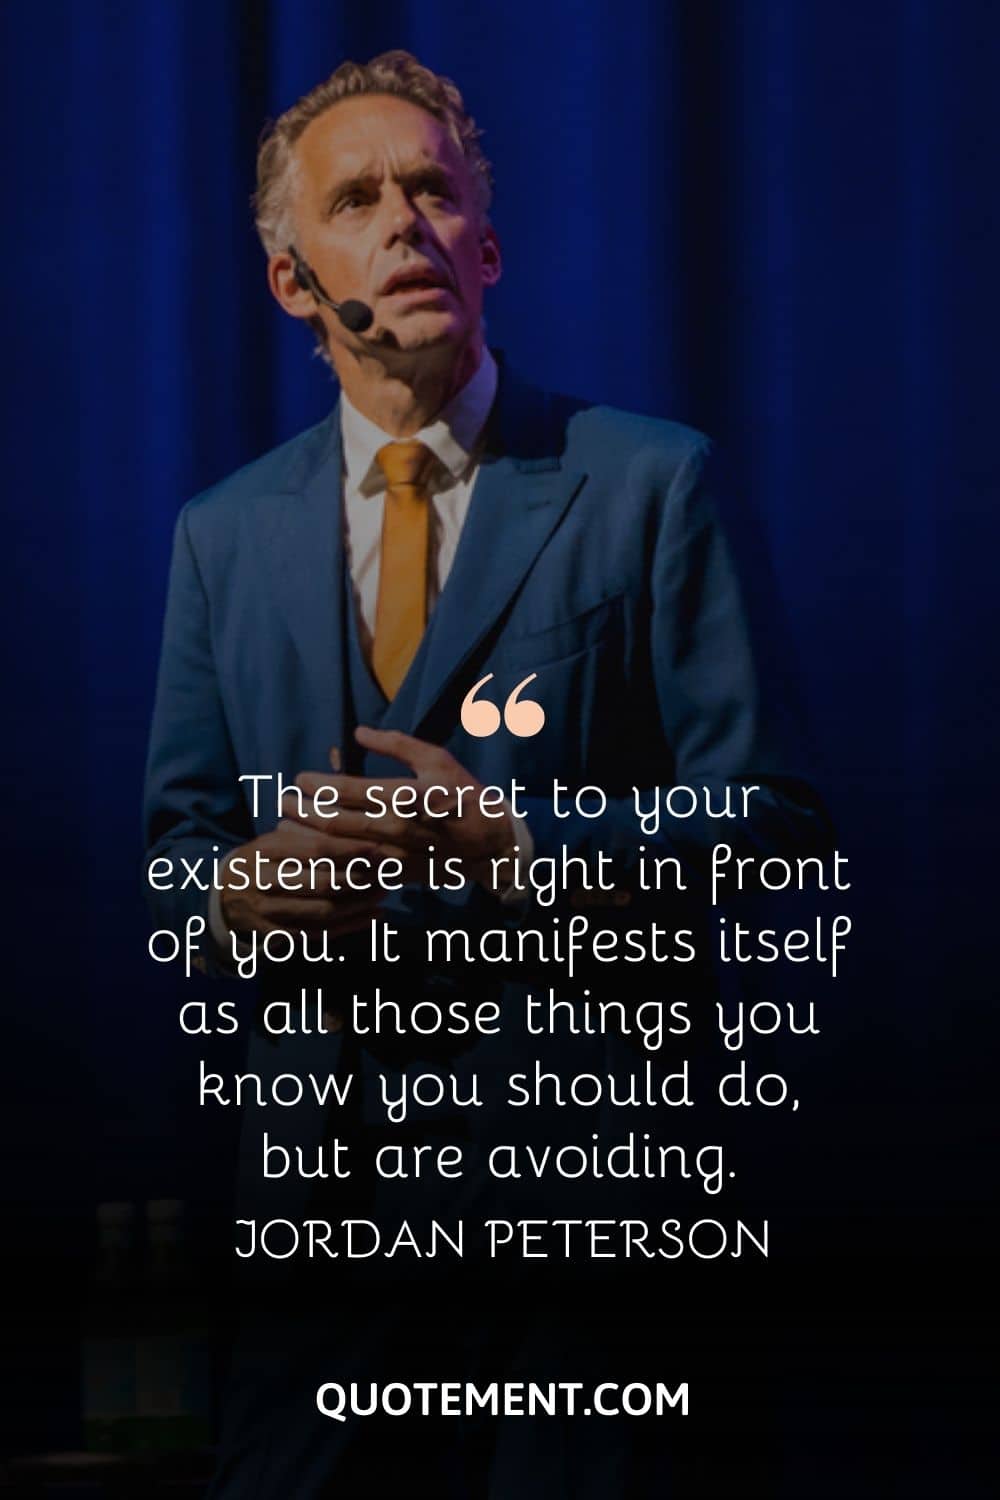 “The secret to your existence is right in front of you. It manifests itself as all those things you know you should do, but are avoiding.” — Jordan Peterson